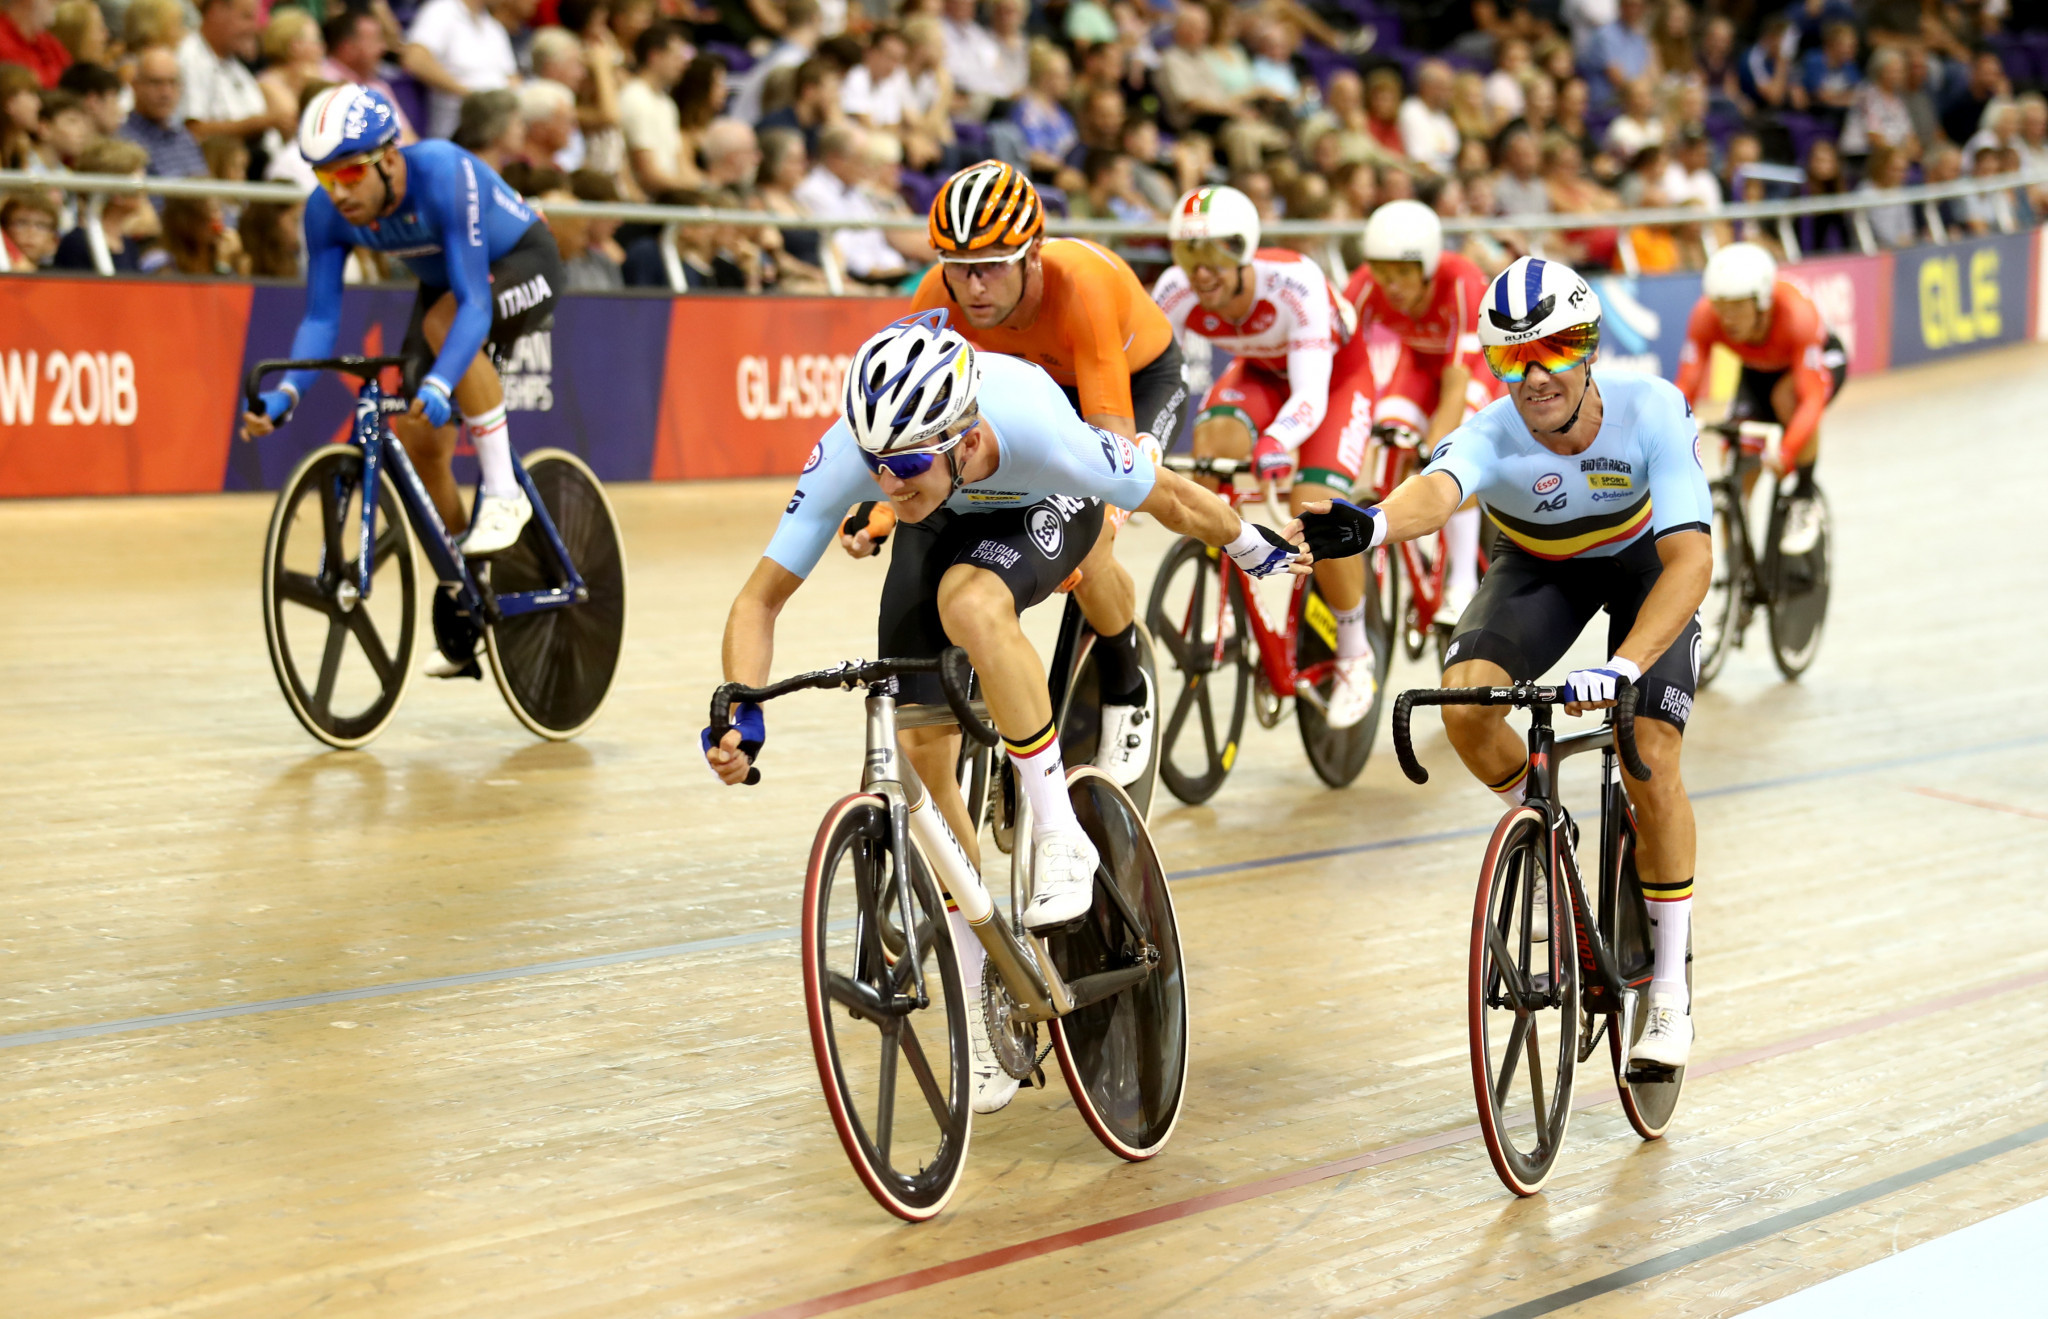 Belgium took top honours in the men's madison event on the penultimate day of track cycling competition ©Getty Images